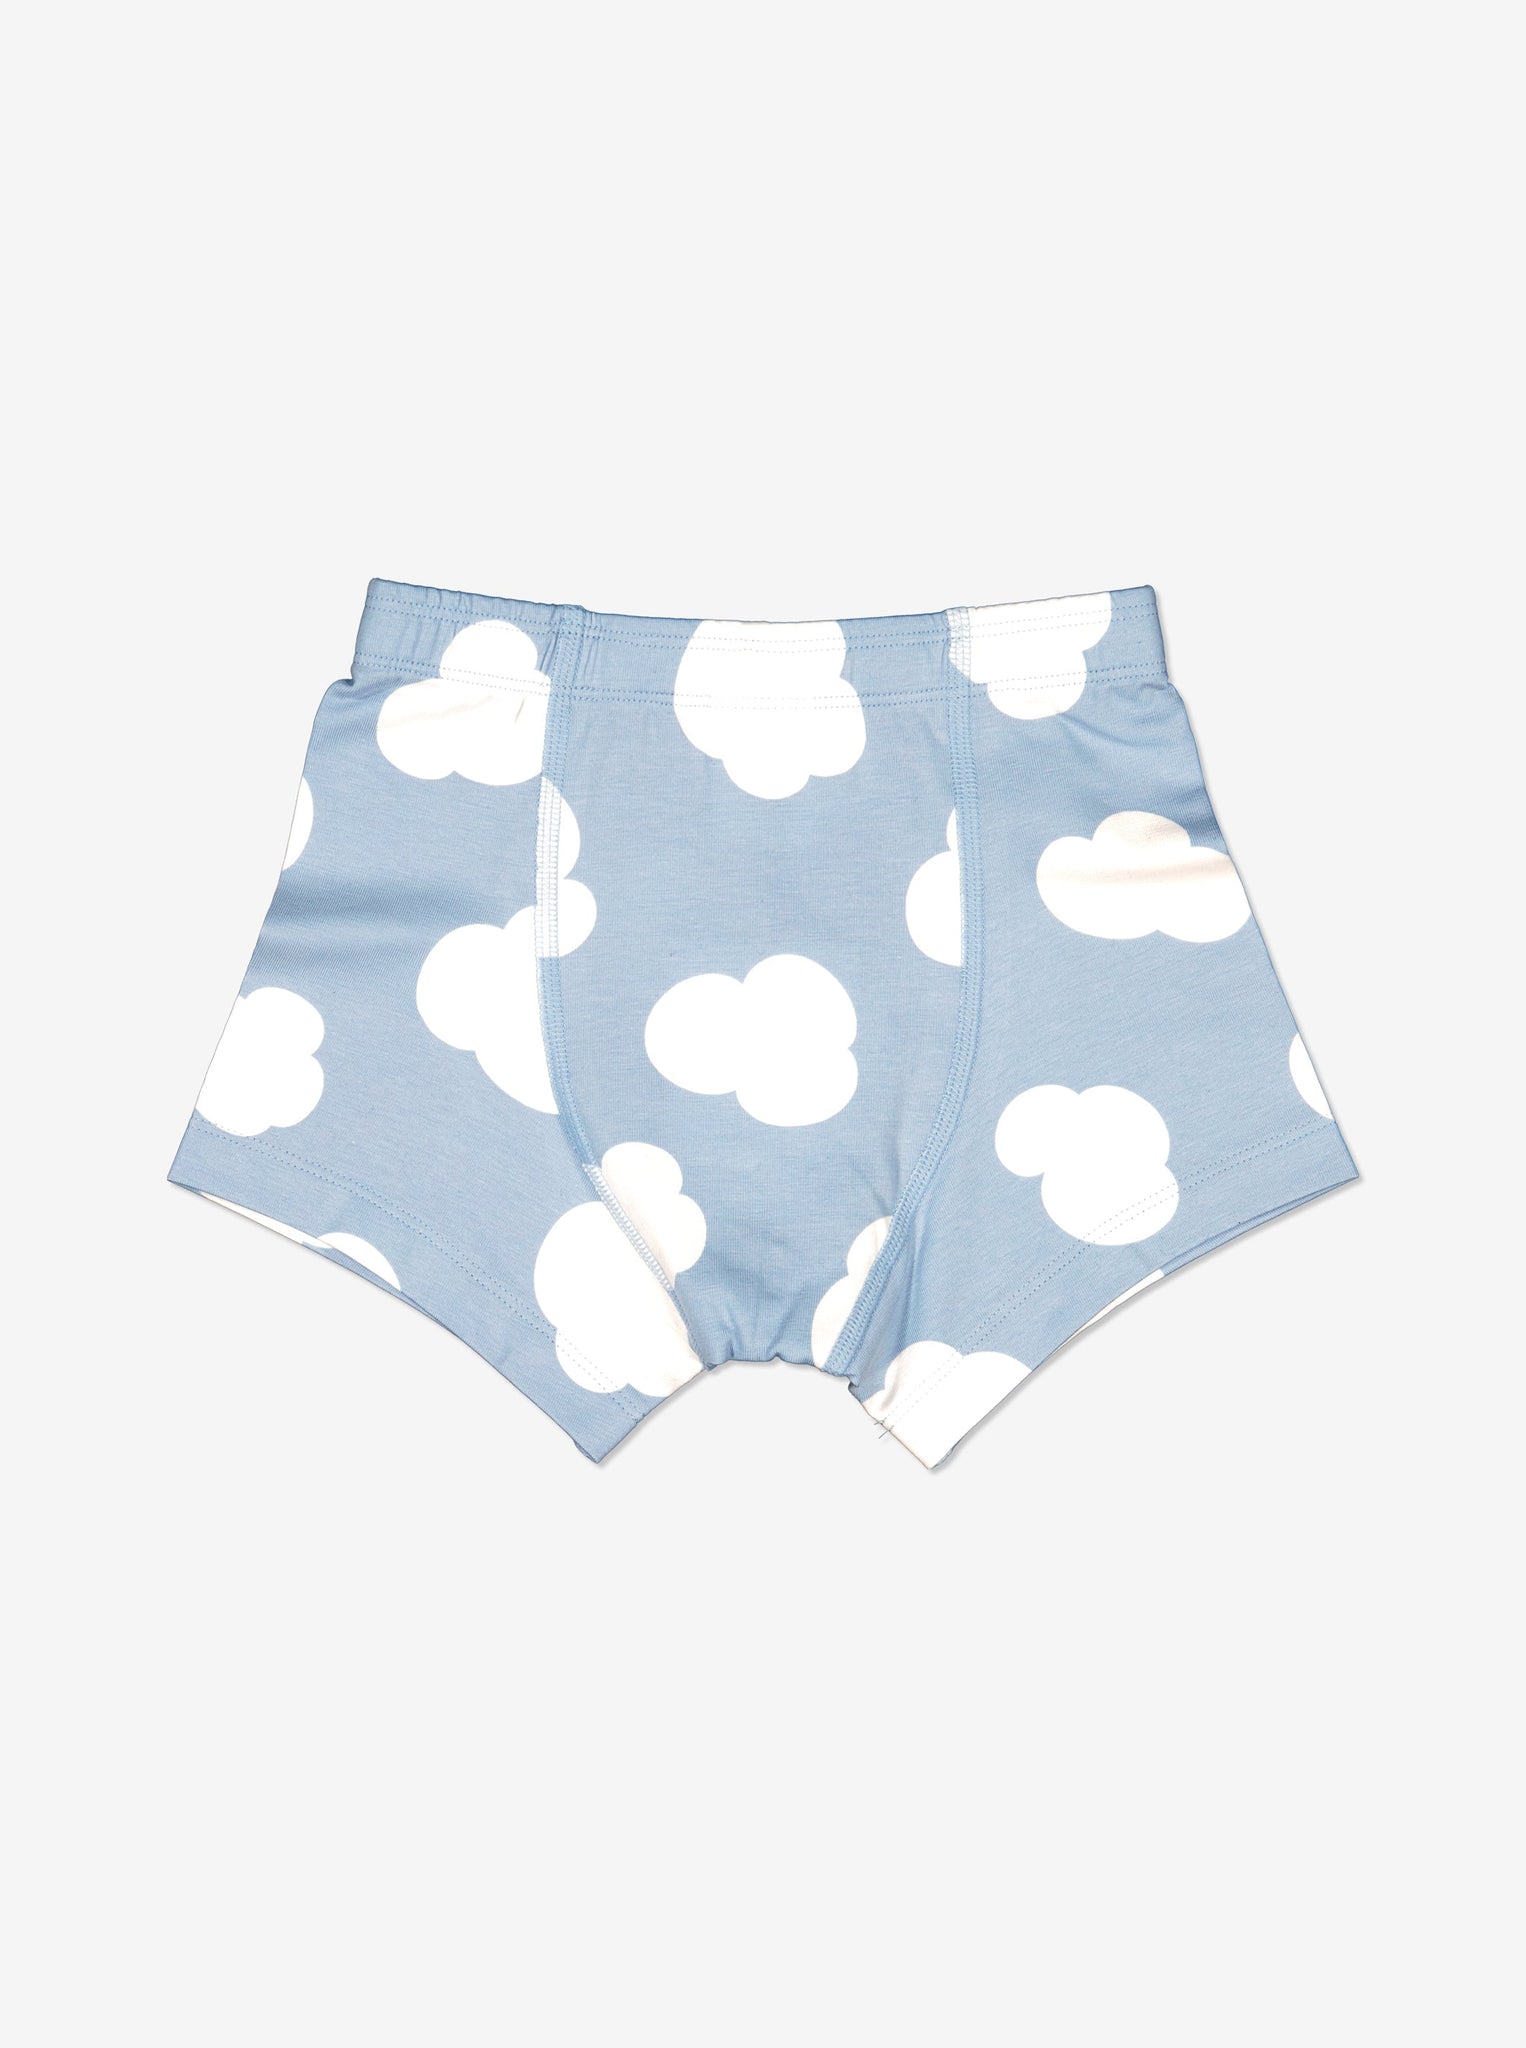  Organic Cotton Blue Boys Boxer Shorts from Polarn O. Pyret Kidswear. Made using ethically sourced materials.